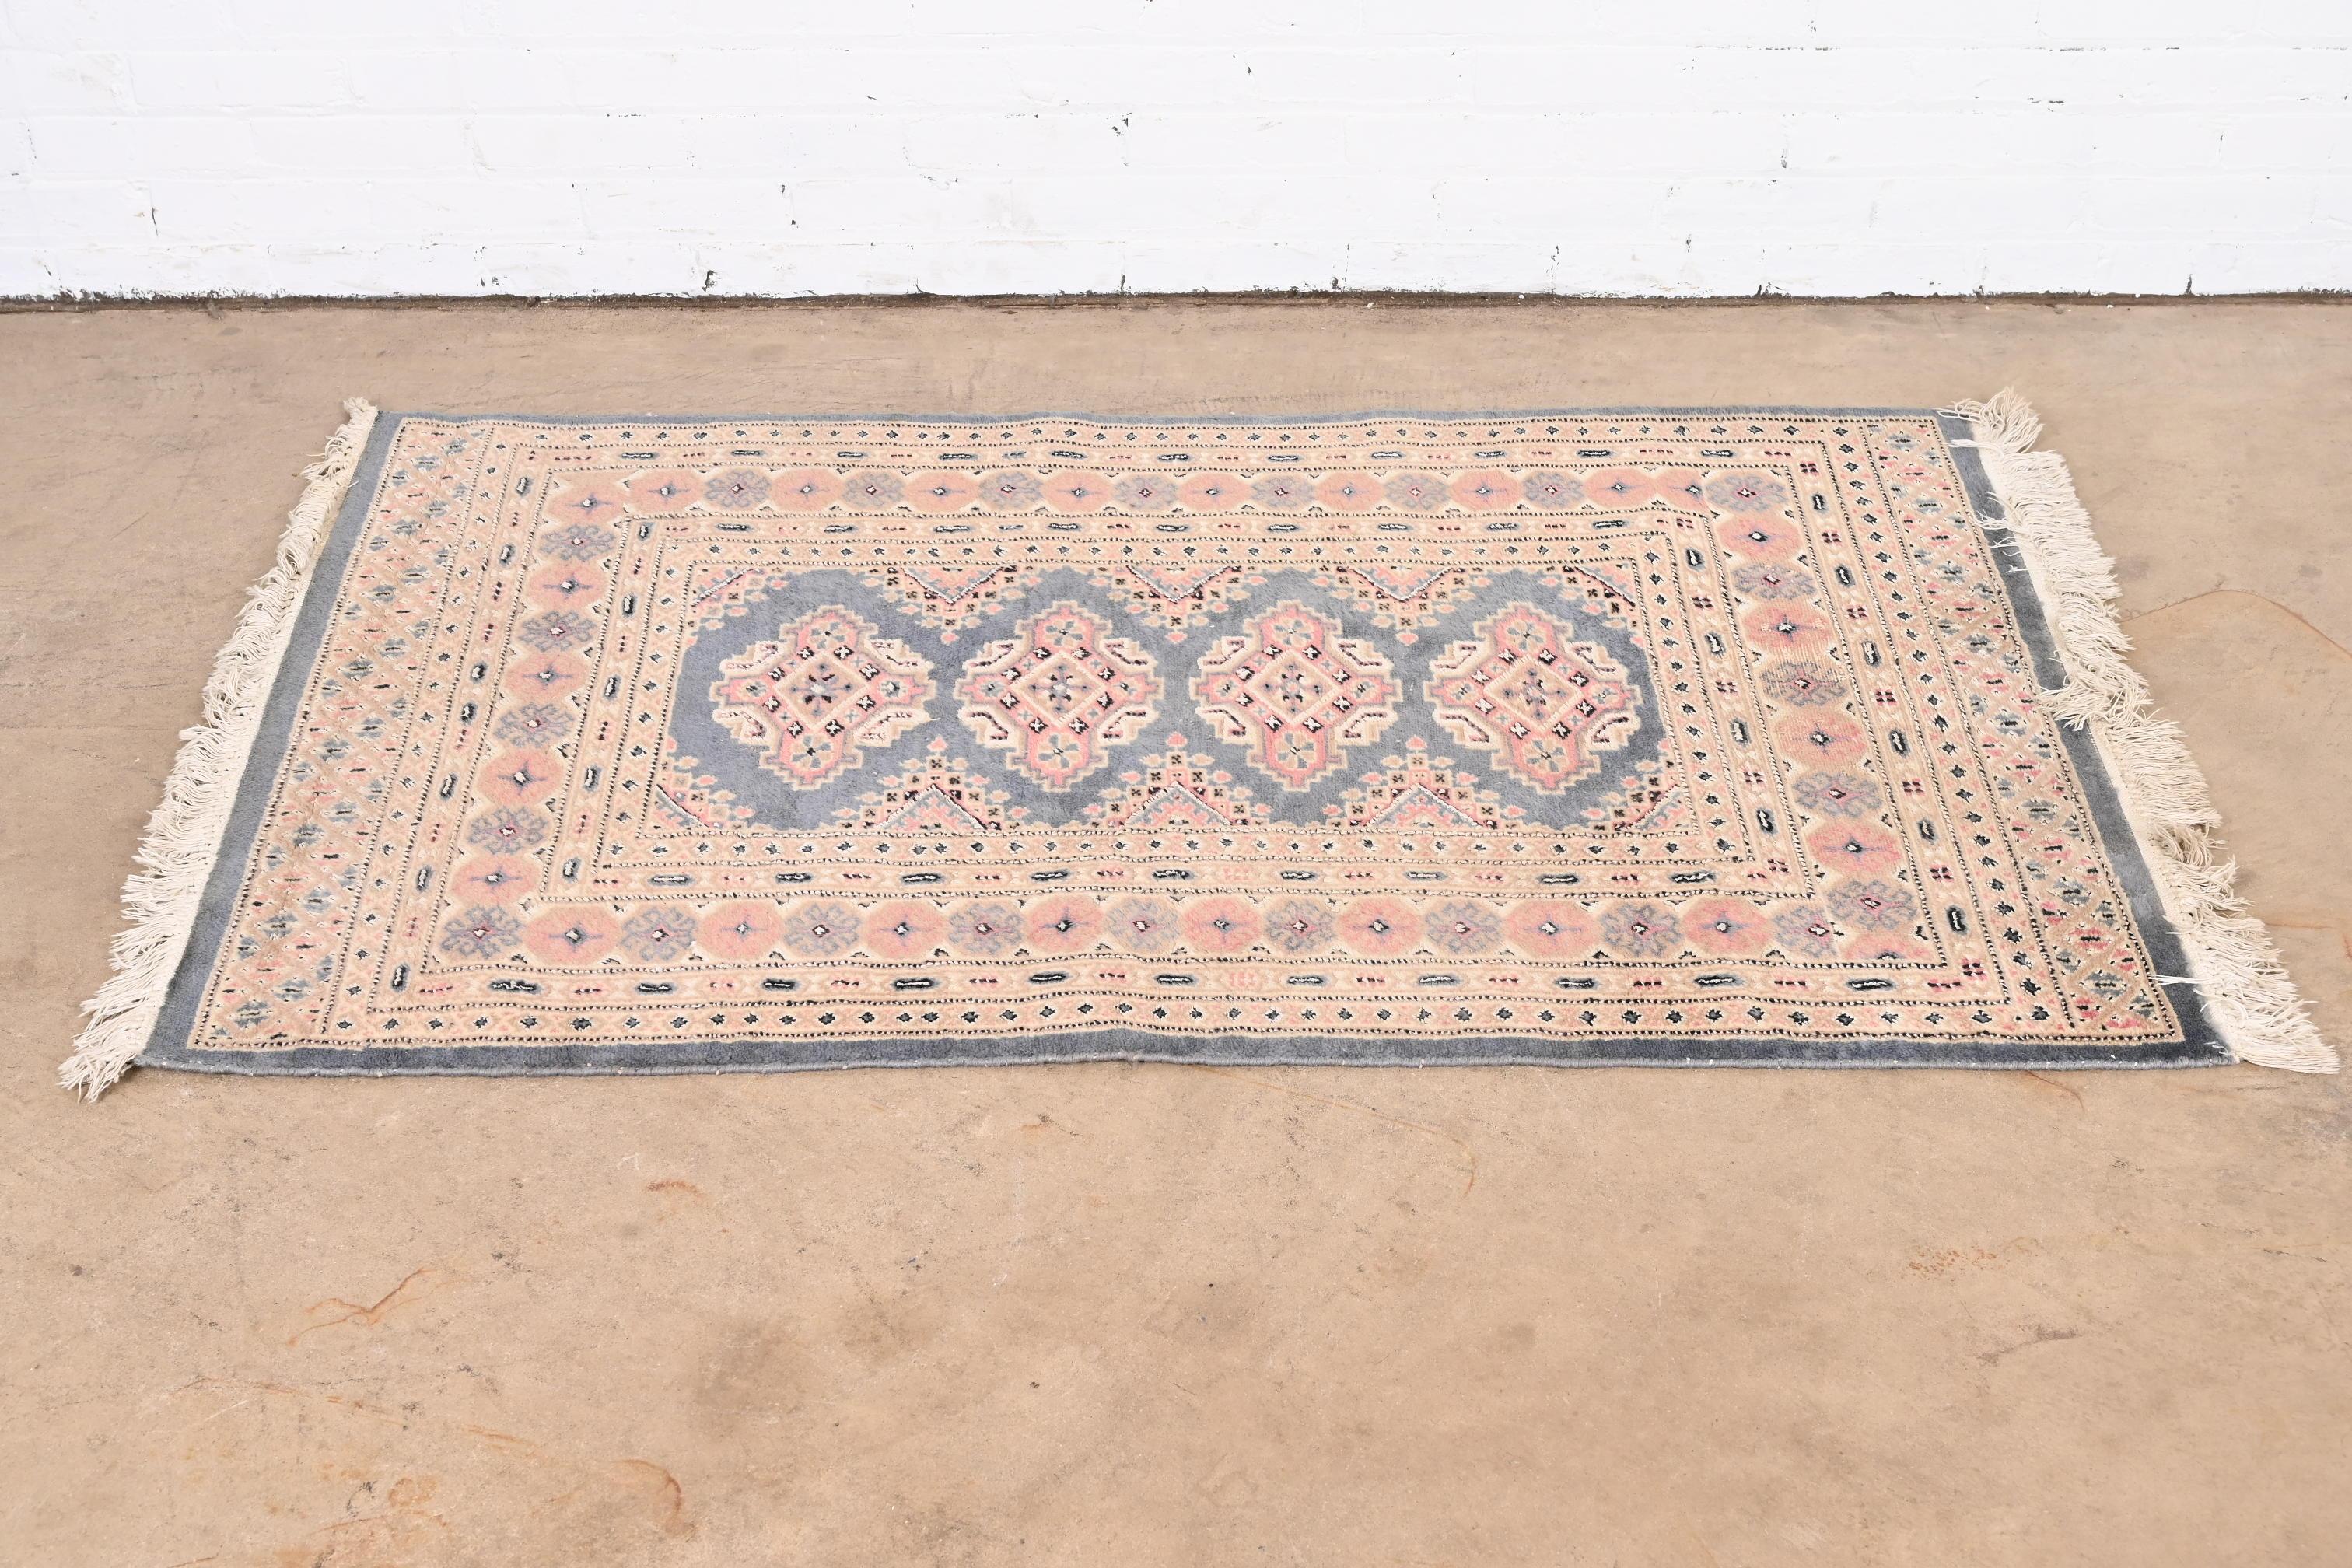 A gorgeous vintage hand-woven Persian Bokhara wool rug

Mid-20th Century

Beautiful geometric design, with predominant colors in pink, blue, and cream.

Measures: 38